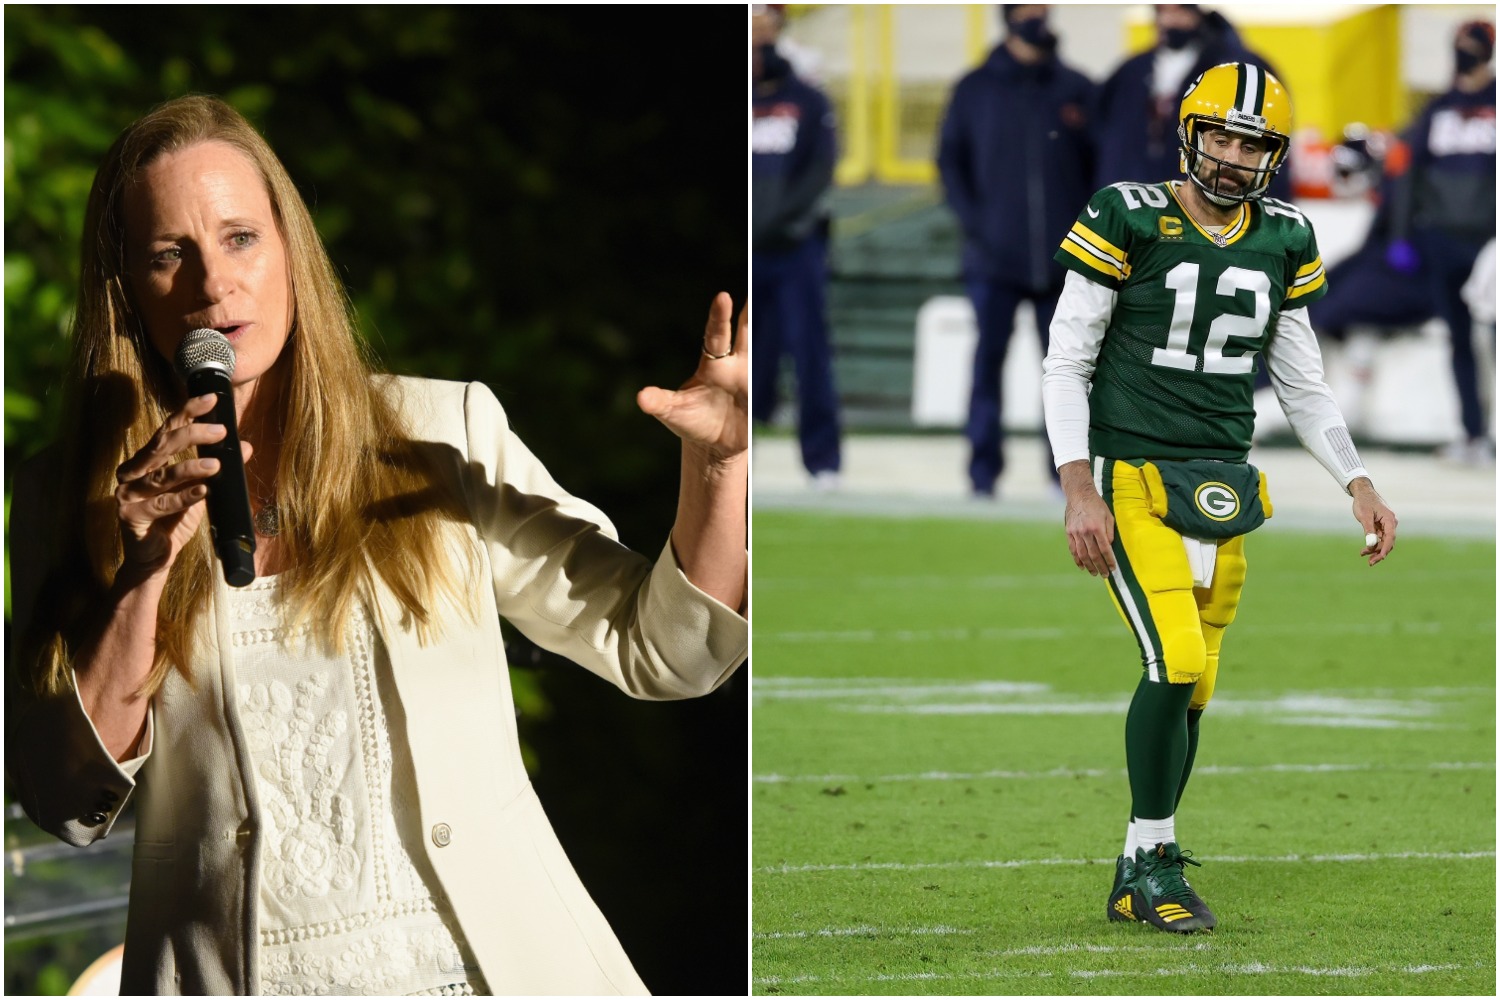 Lori Woodley speaks at an event as Packers QB Aaron Rodgers walks across the field.